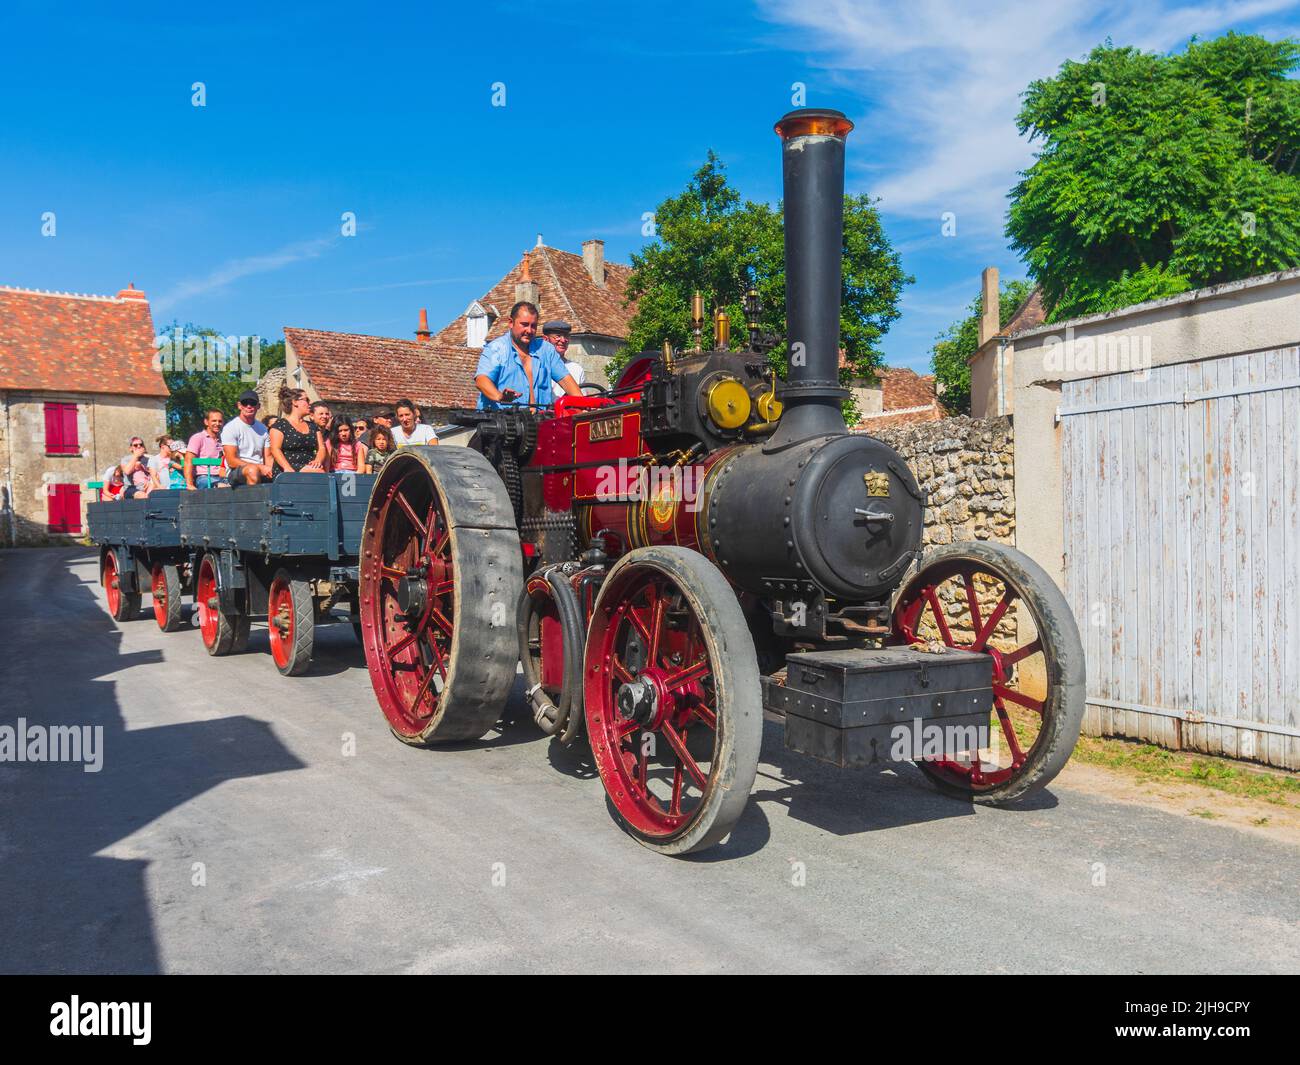 1931 Allchin 6 nhp General Purpose Engine 'Knapp' carrying passengers at street fair in Angles-sur-l'Anglin, Vienne (86), France. Stock Photo